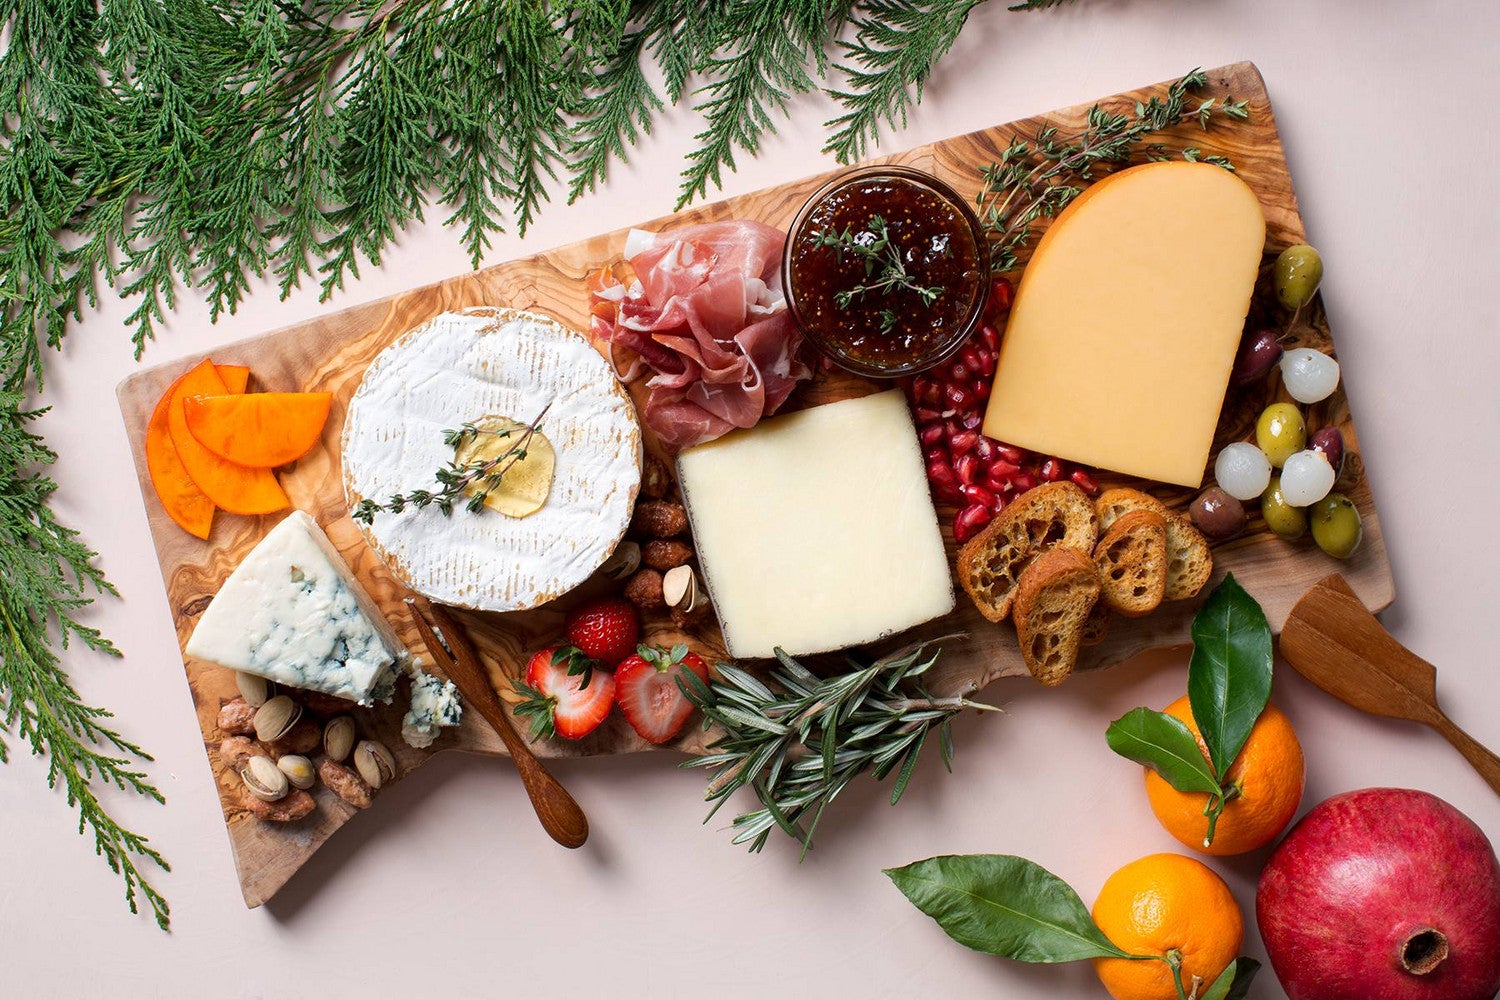 How to Make a Winter Cheese Board in Under 30 Minutes | Domino